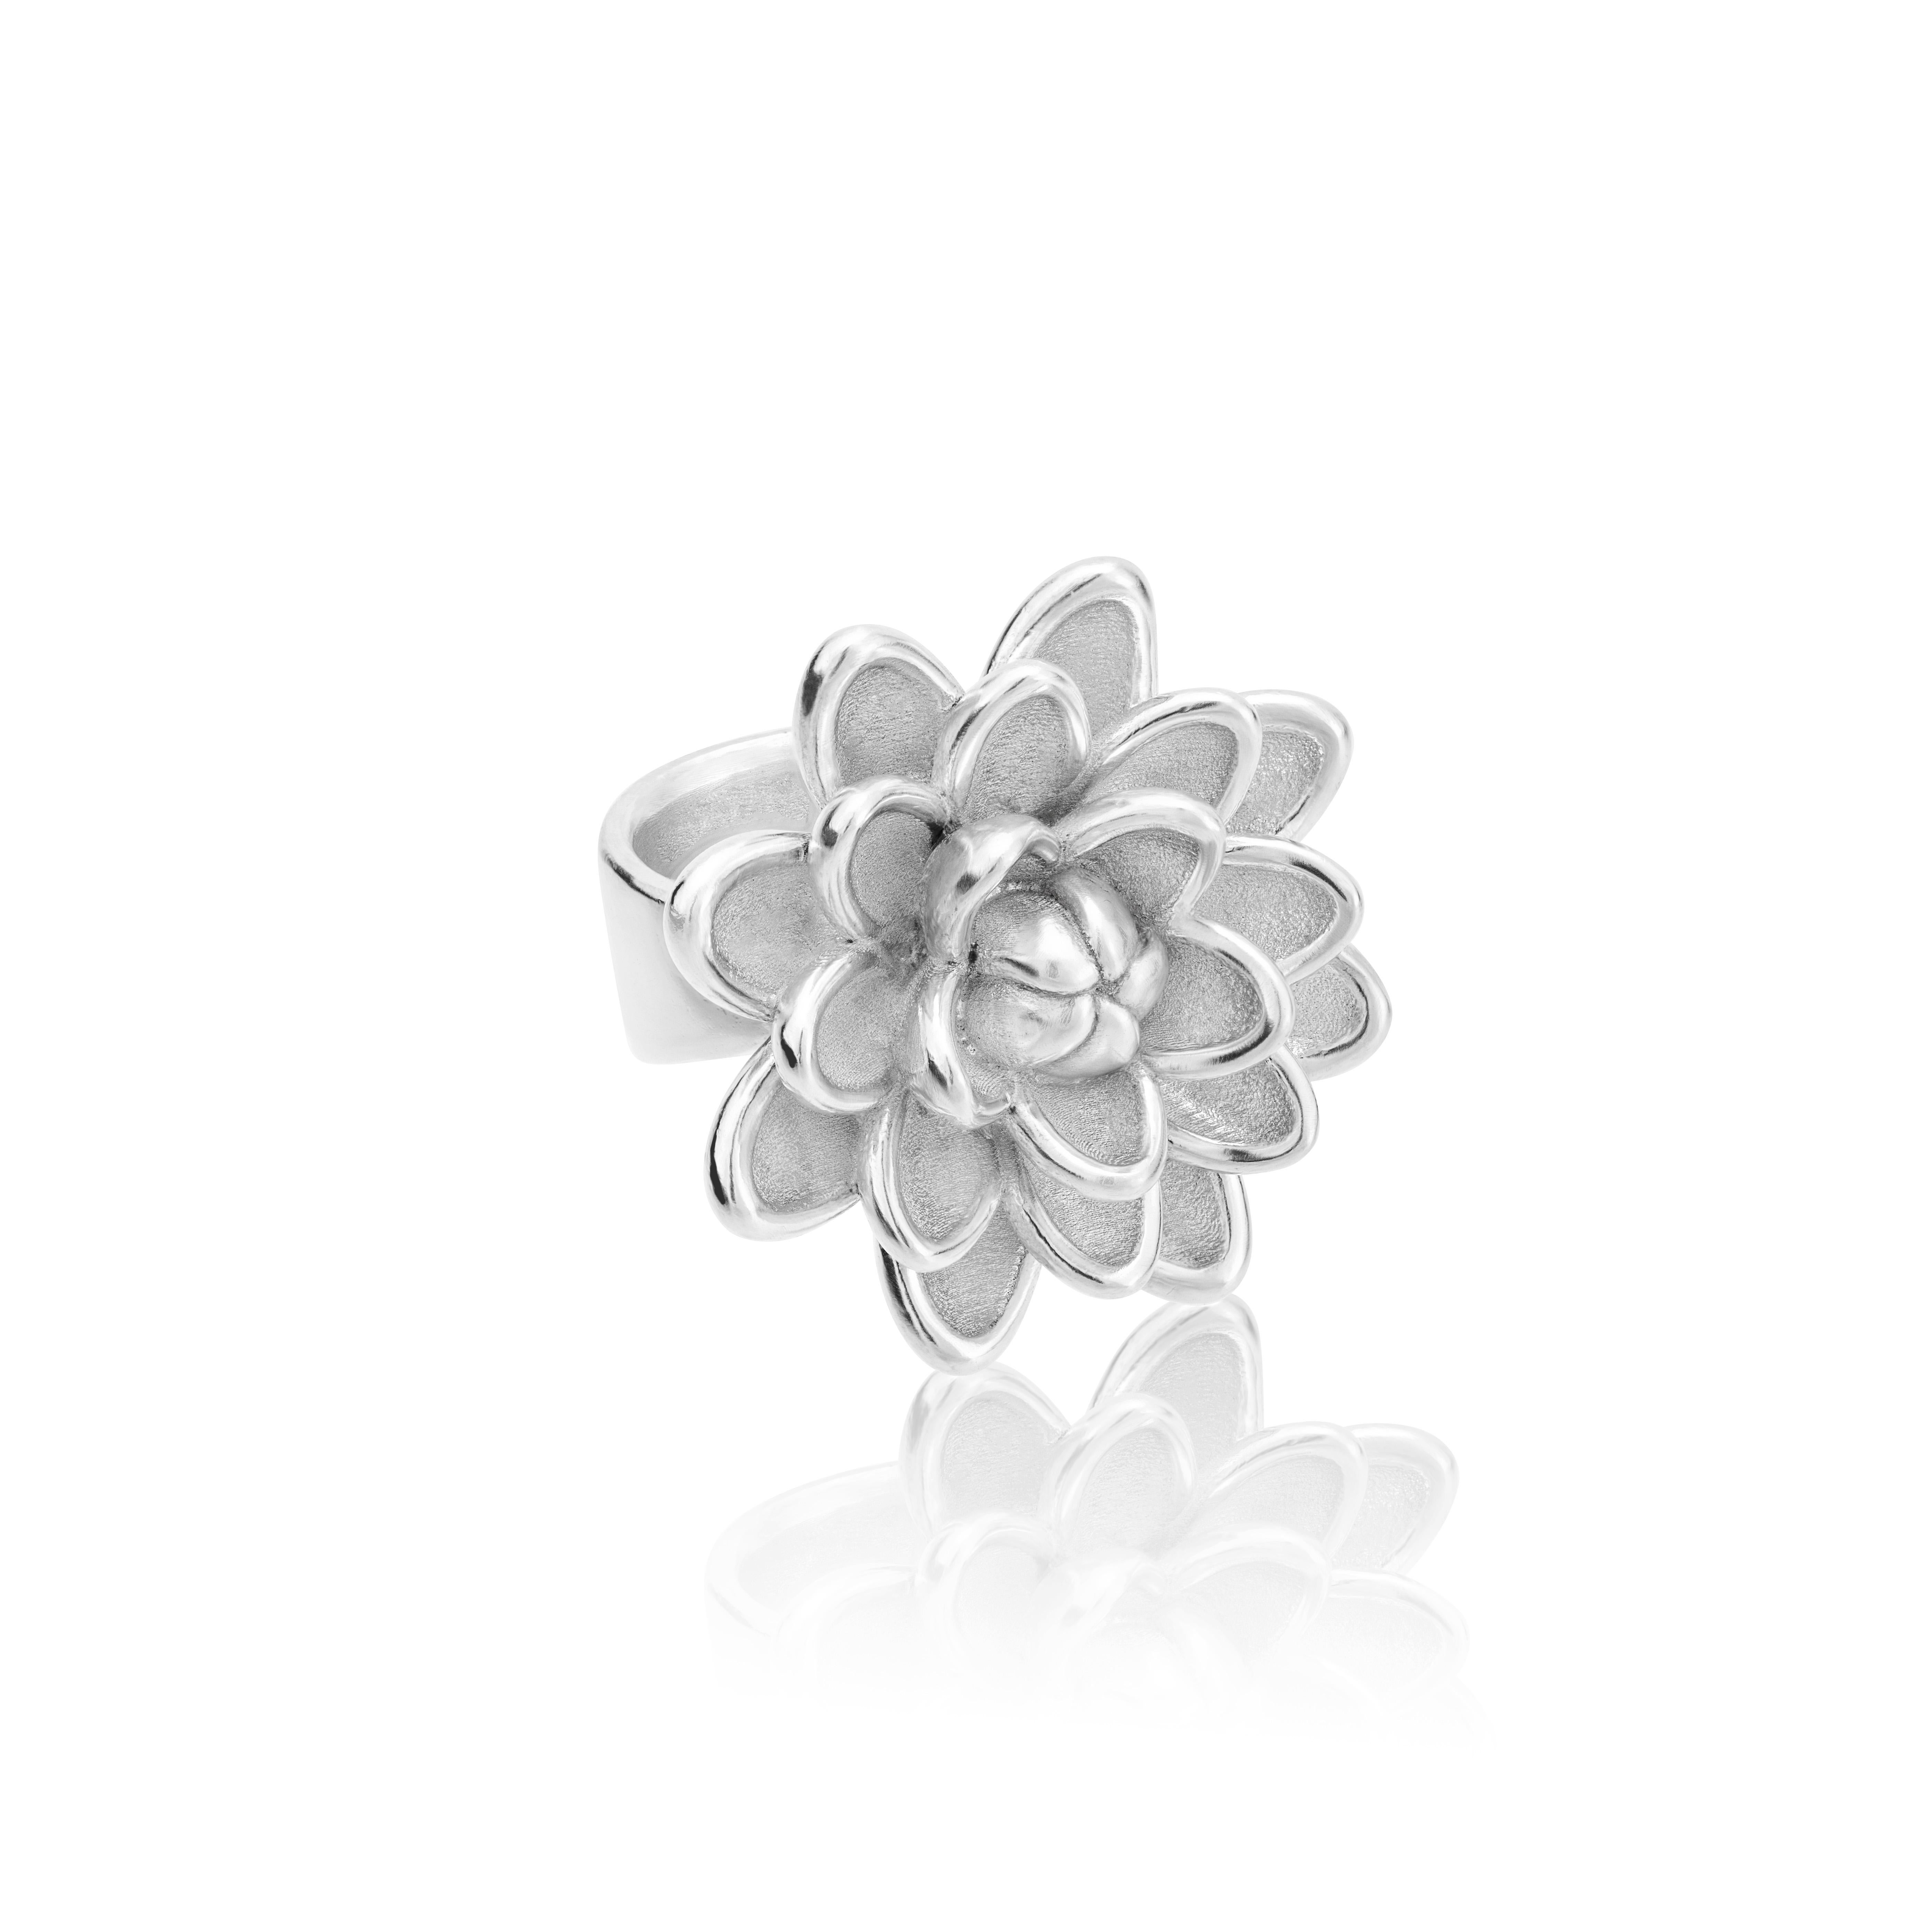 Inspired on the Dalia, Mexico's stunning national flower, this ring is delicately handmade in sterling silver.

Inspired by the Dahlia, Mexico’s beautiful national flower, this collection is presented in full Bloom with all the crowned circles